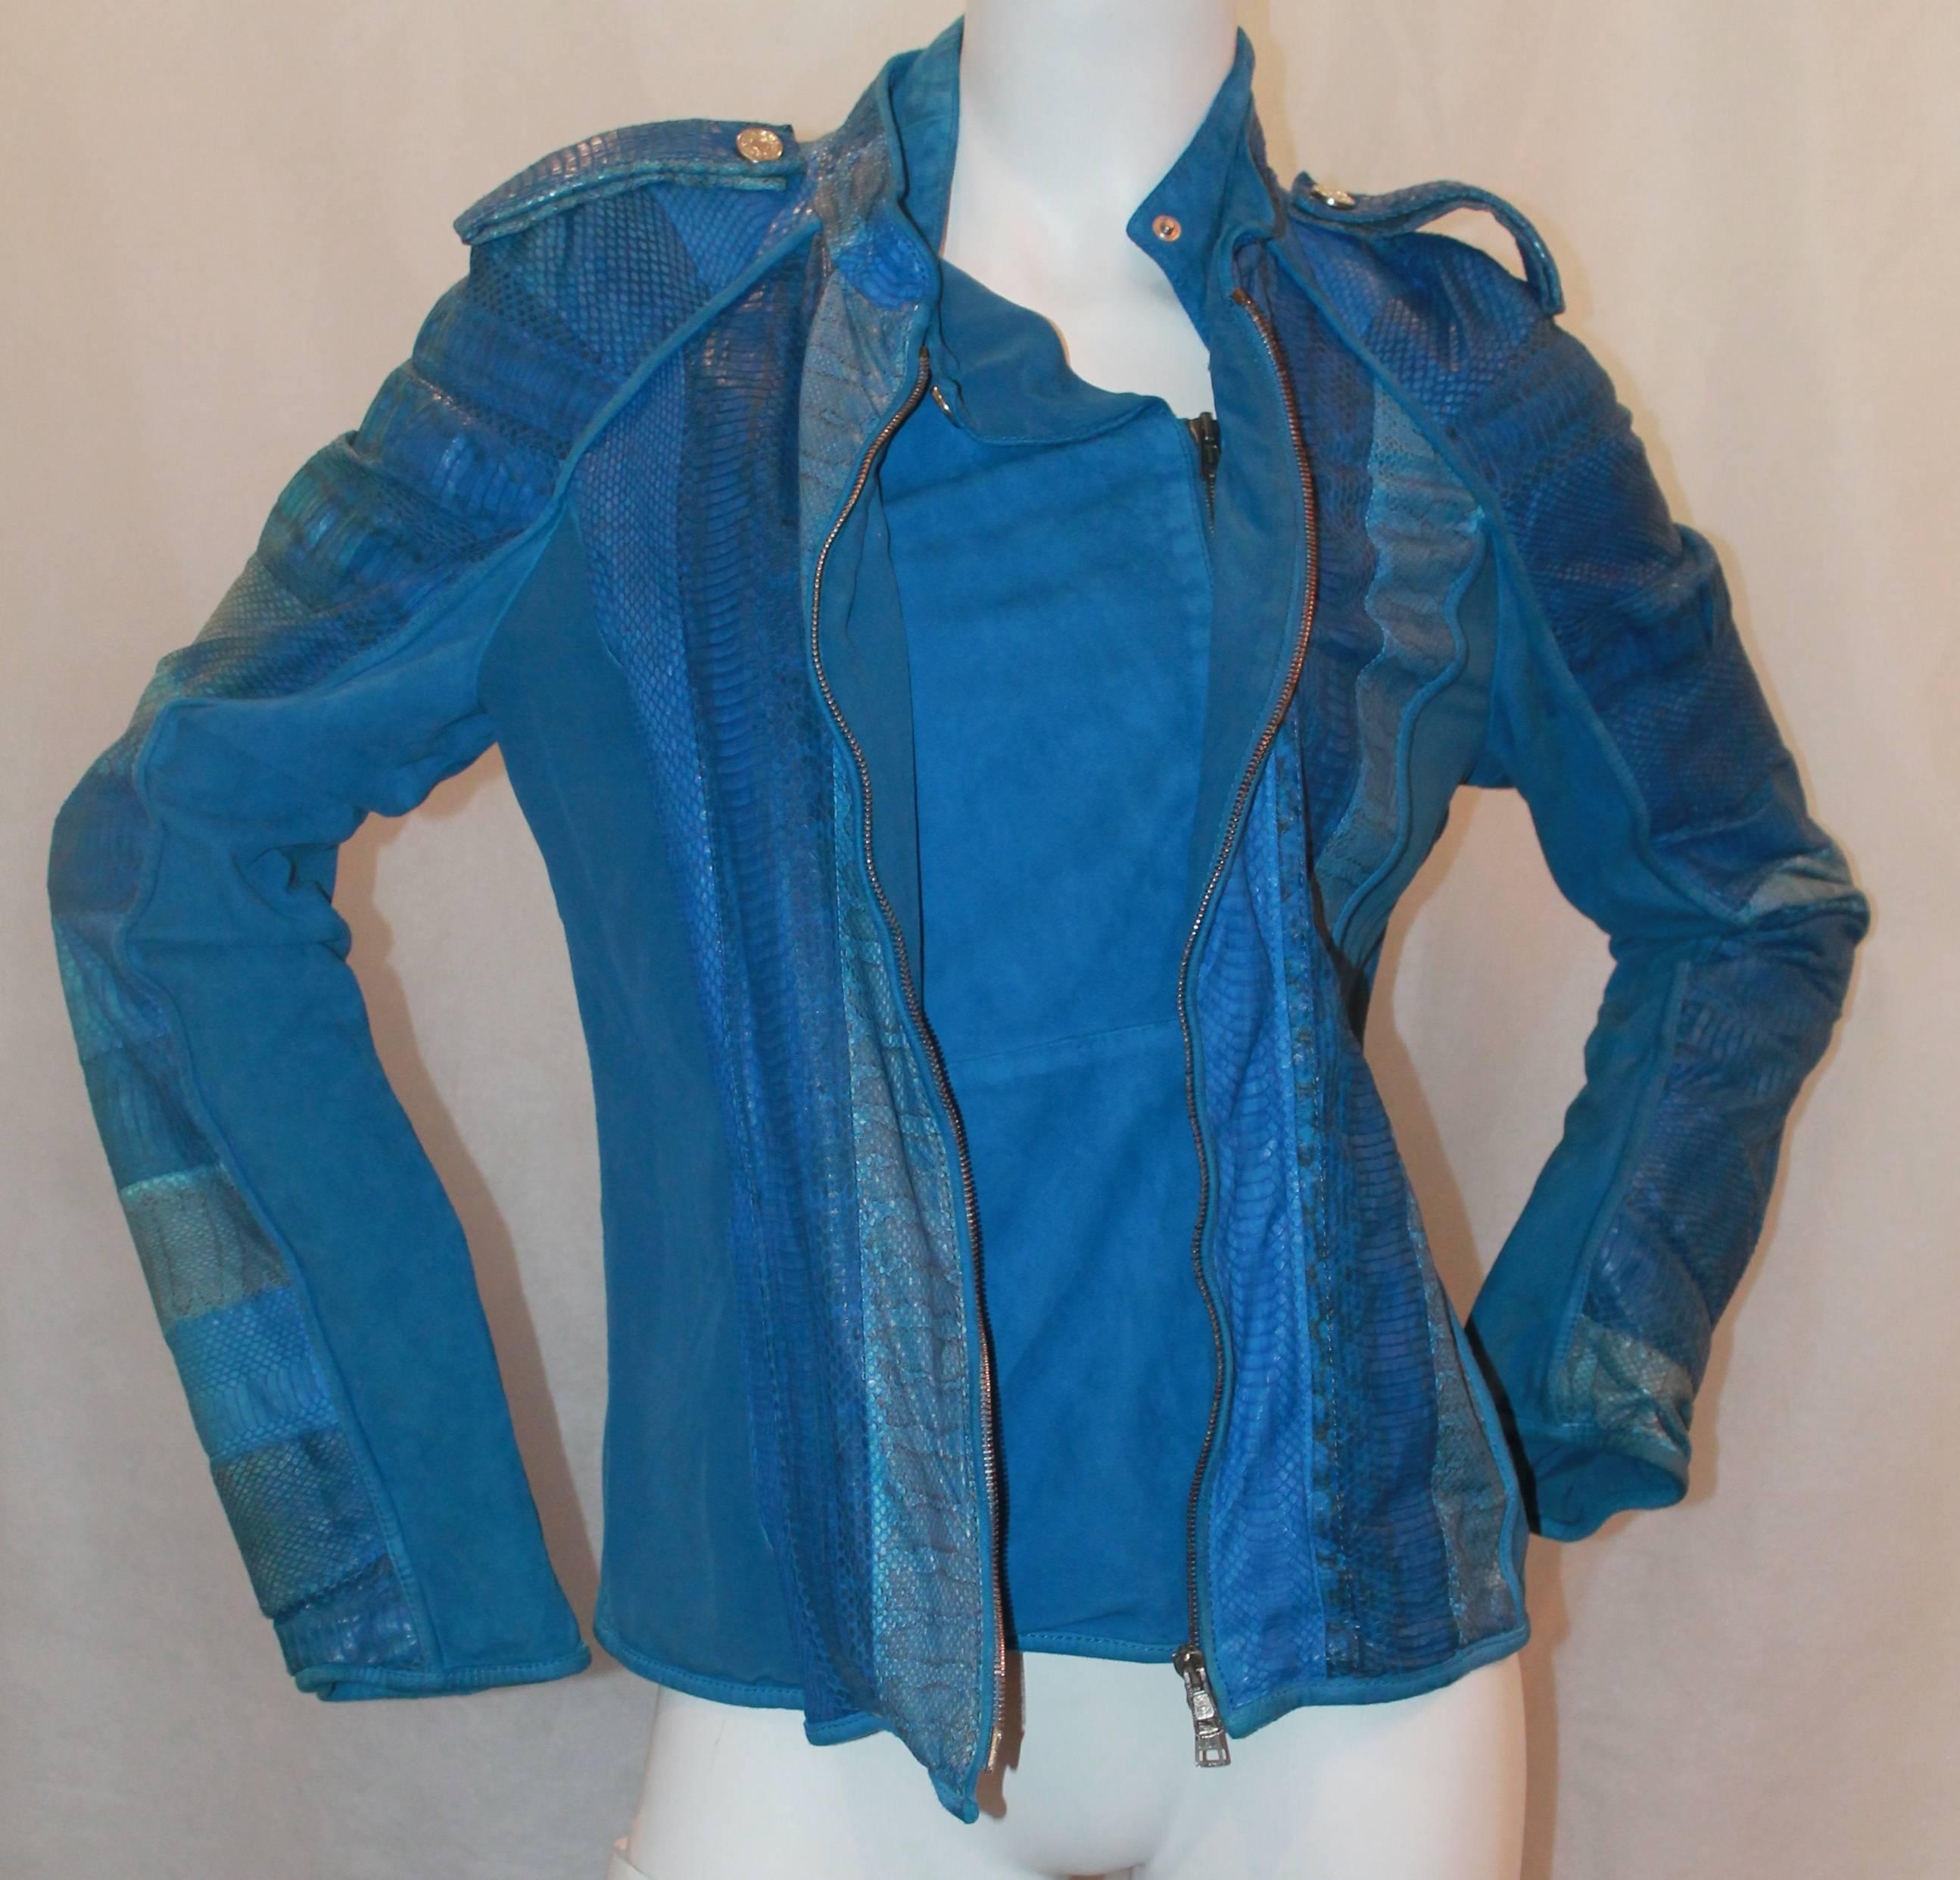 Roberto Cavalli Blue Silk, Snake, & Suede Jacket - 42.  This jacket is in excellent condition.  It features multi blue snake skin, sued under the sleeves, and a silk lining.  It has a double zipper with a multi layered front and a neck